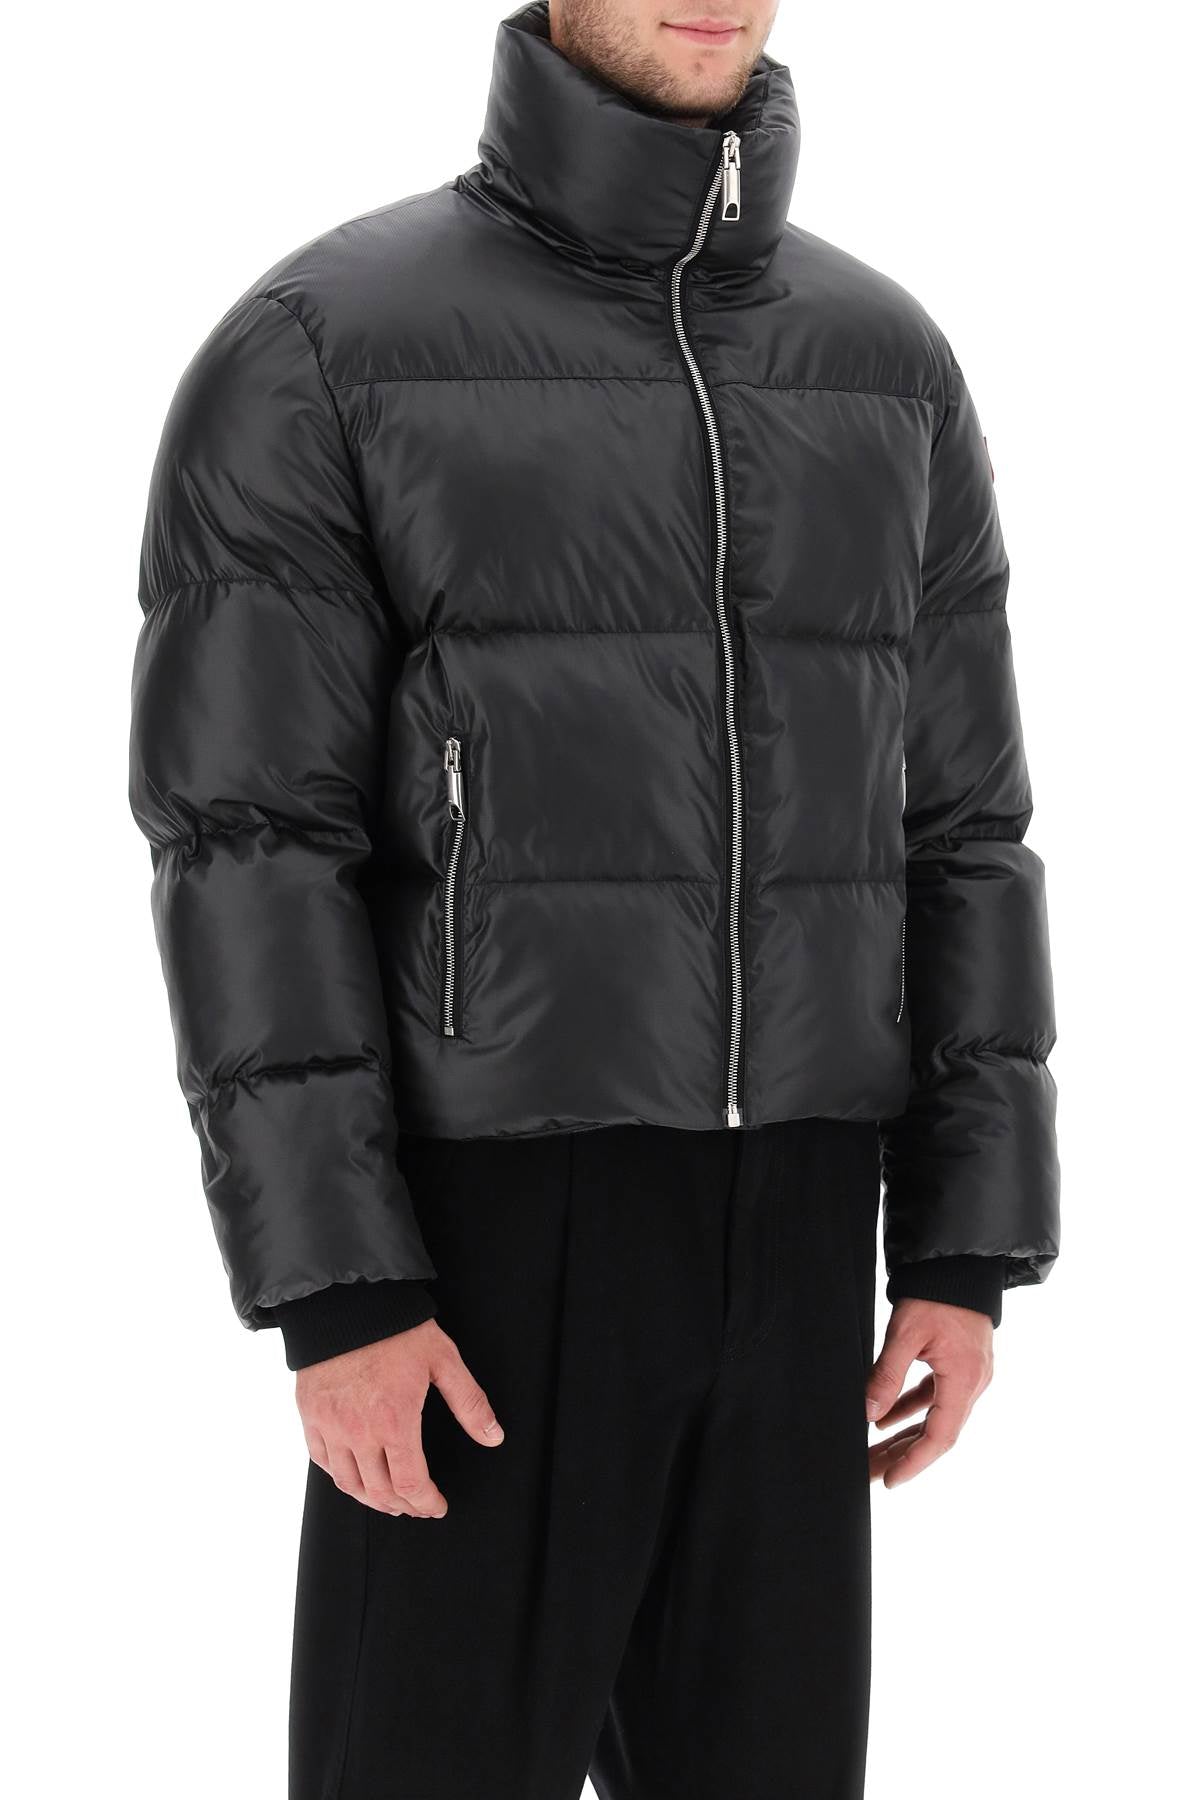 Bally cropped puffer jacket in ripstop-Bally-M-Urbanheer